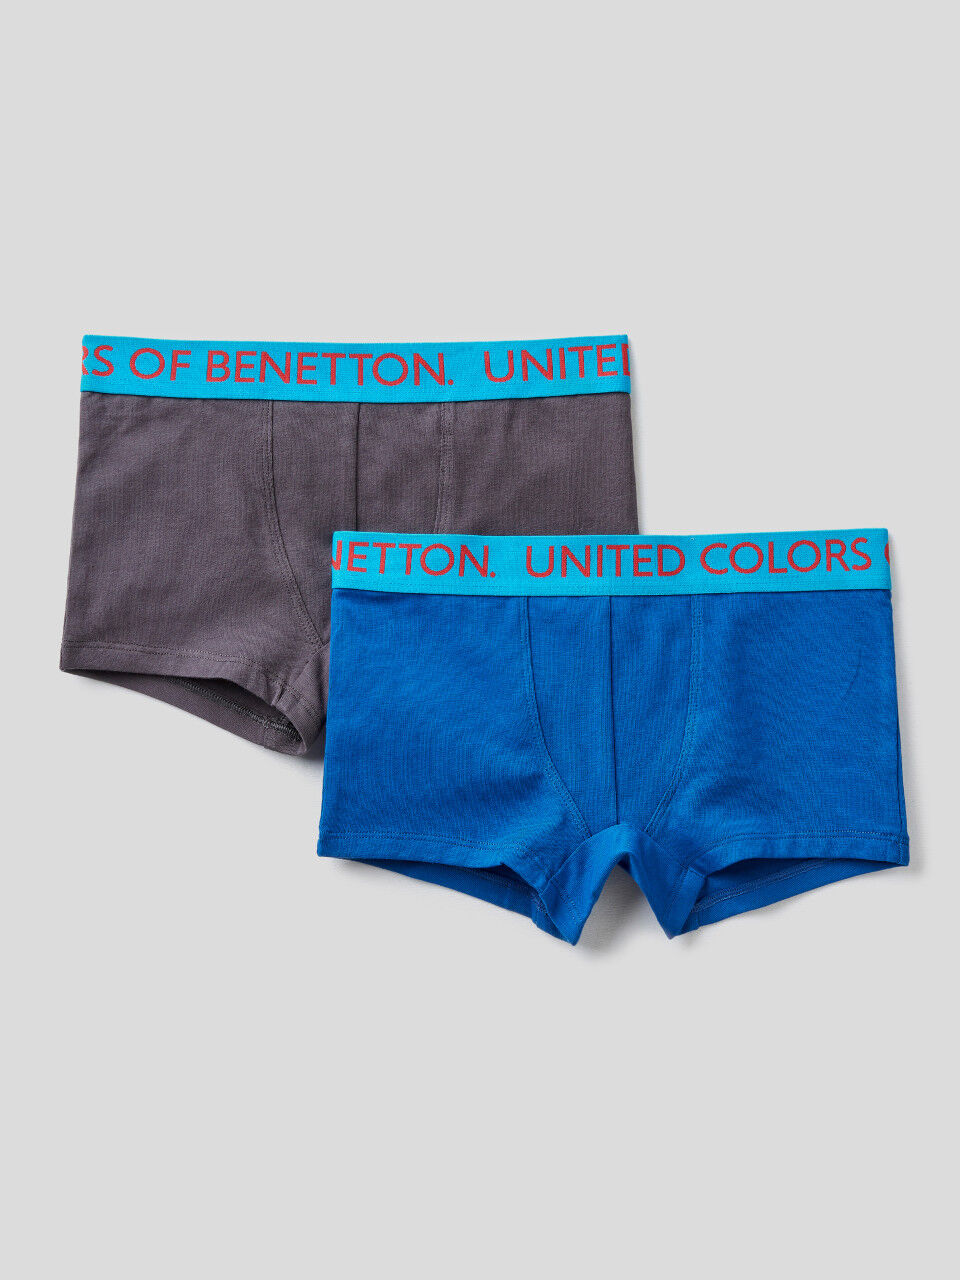 Two pairs of boxers with logoed elastic